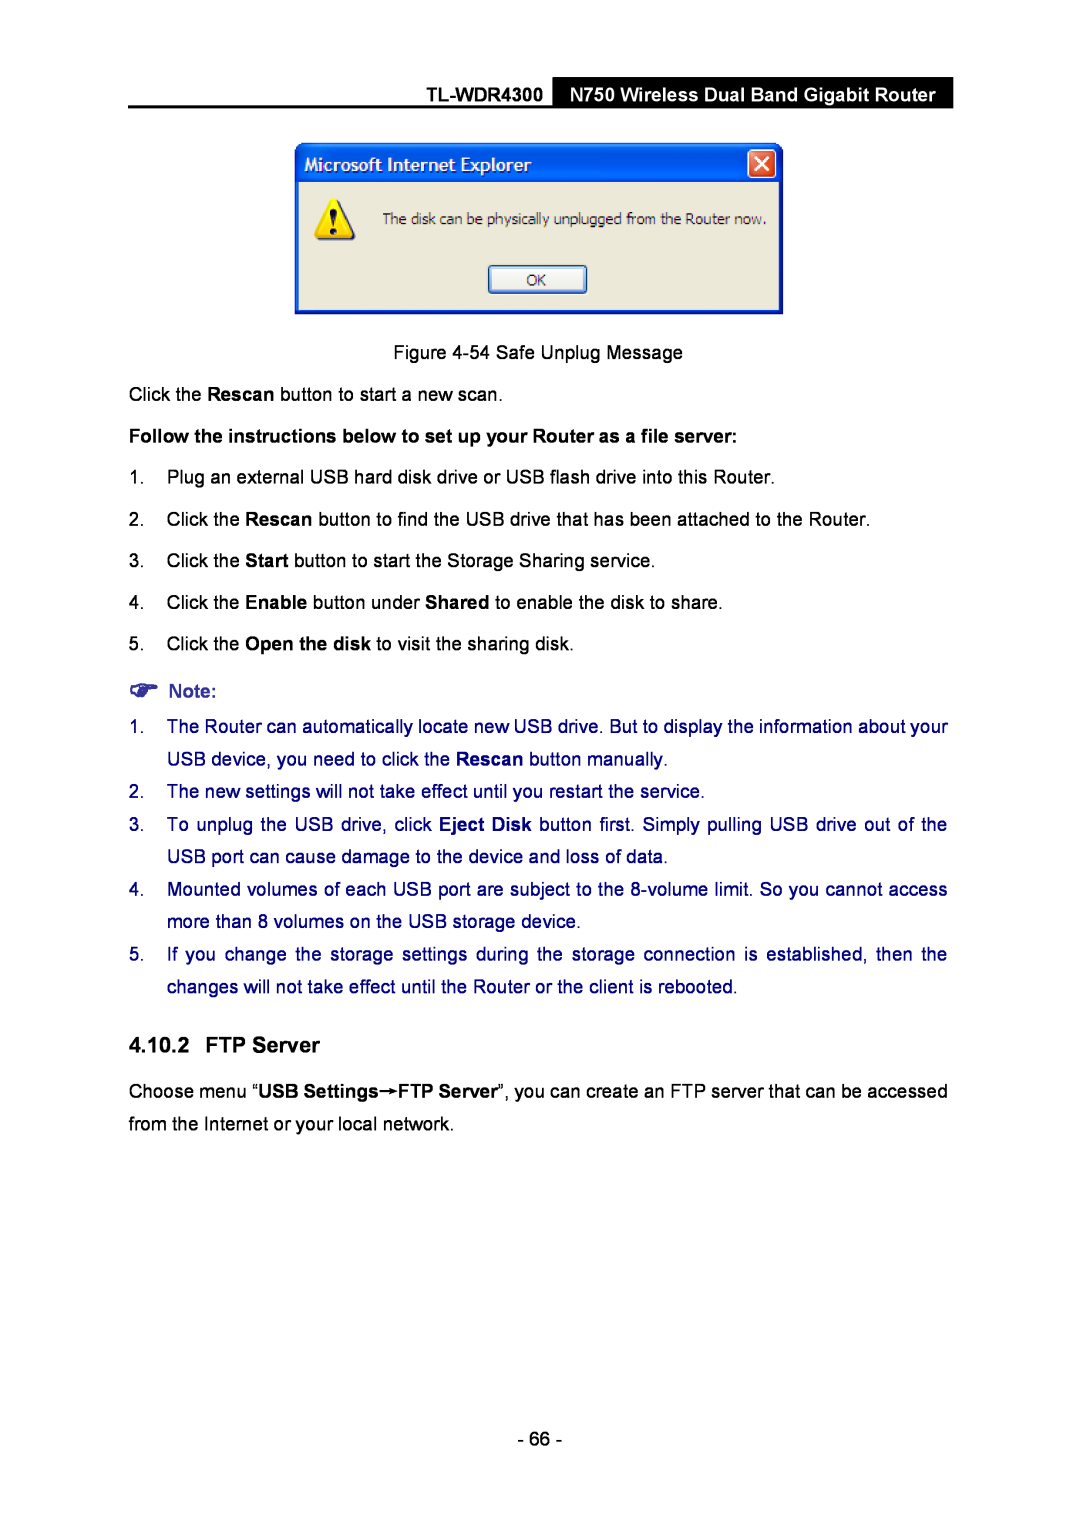 TP-Link TL-WDR4300 manual FTP Server, Follow the instructions below to set up your Router as a file server,  Note 